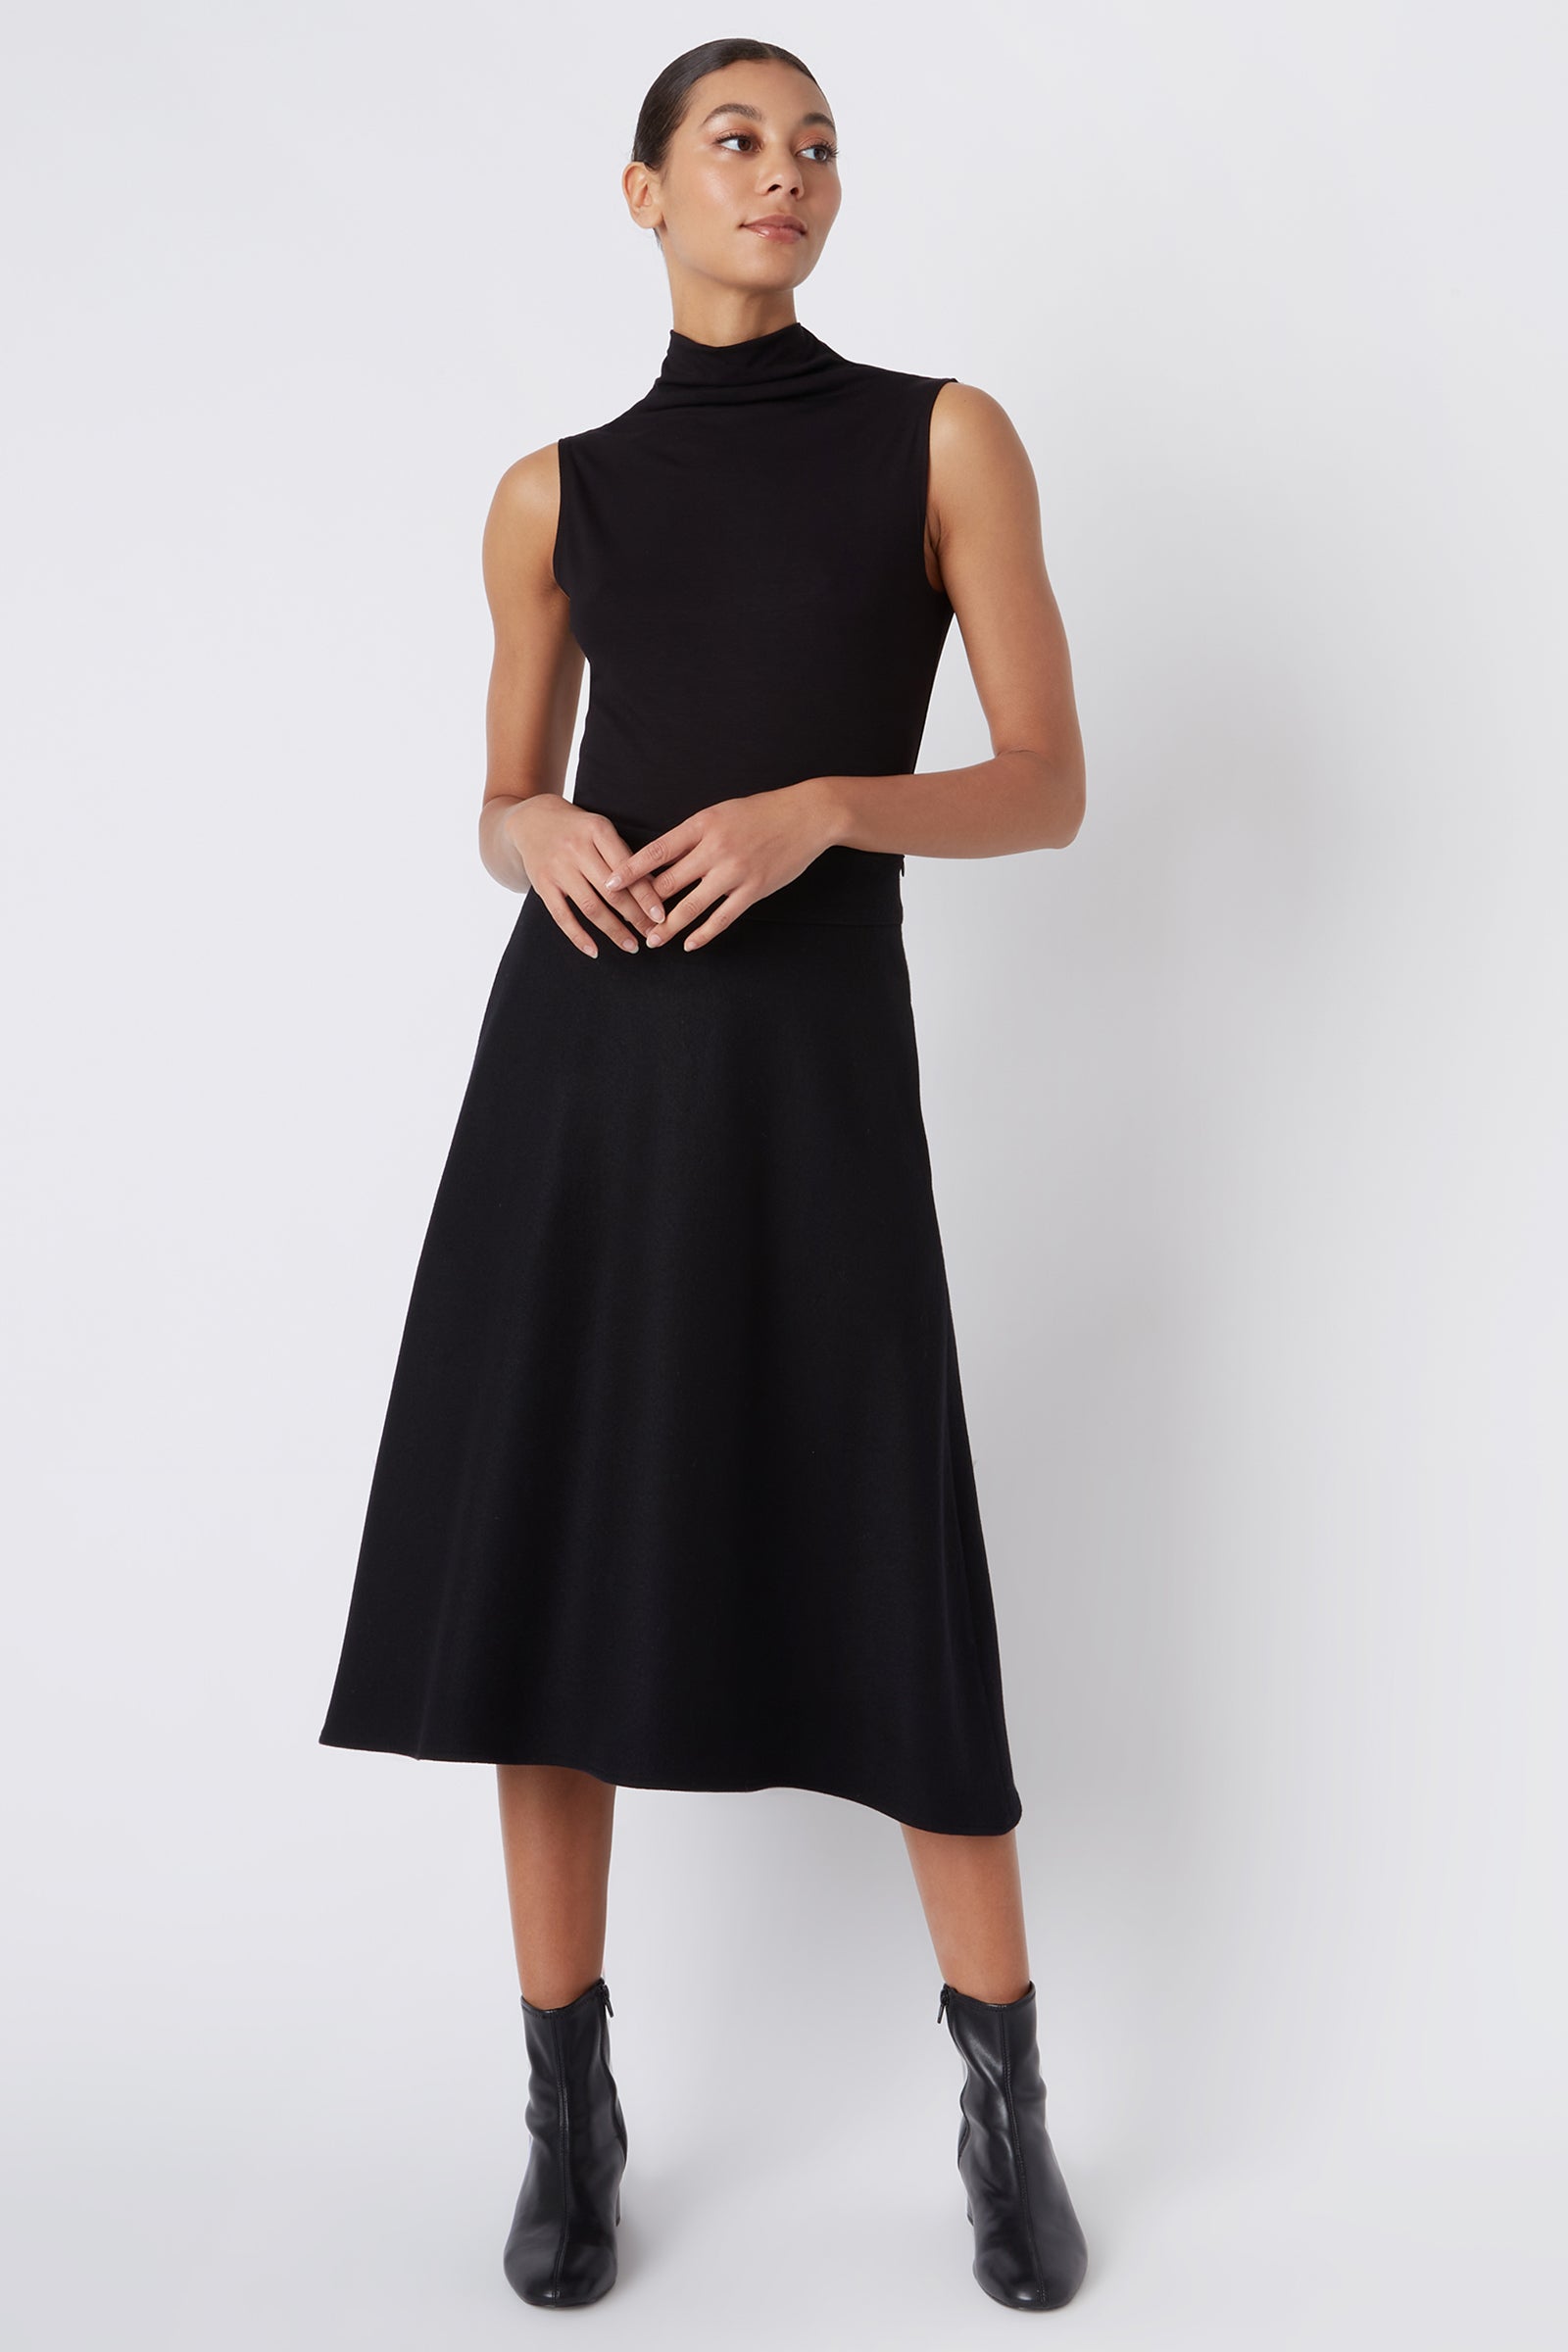 Kal Rieman Martina Kick Skirt in Black Felted Jersey on Model Looking Left Full Front View